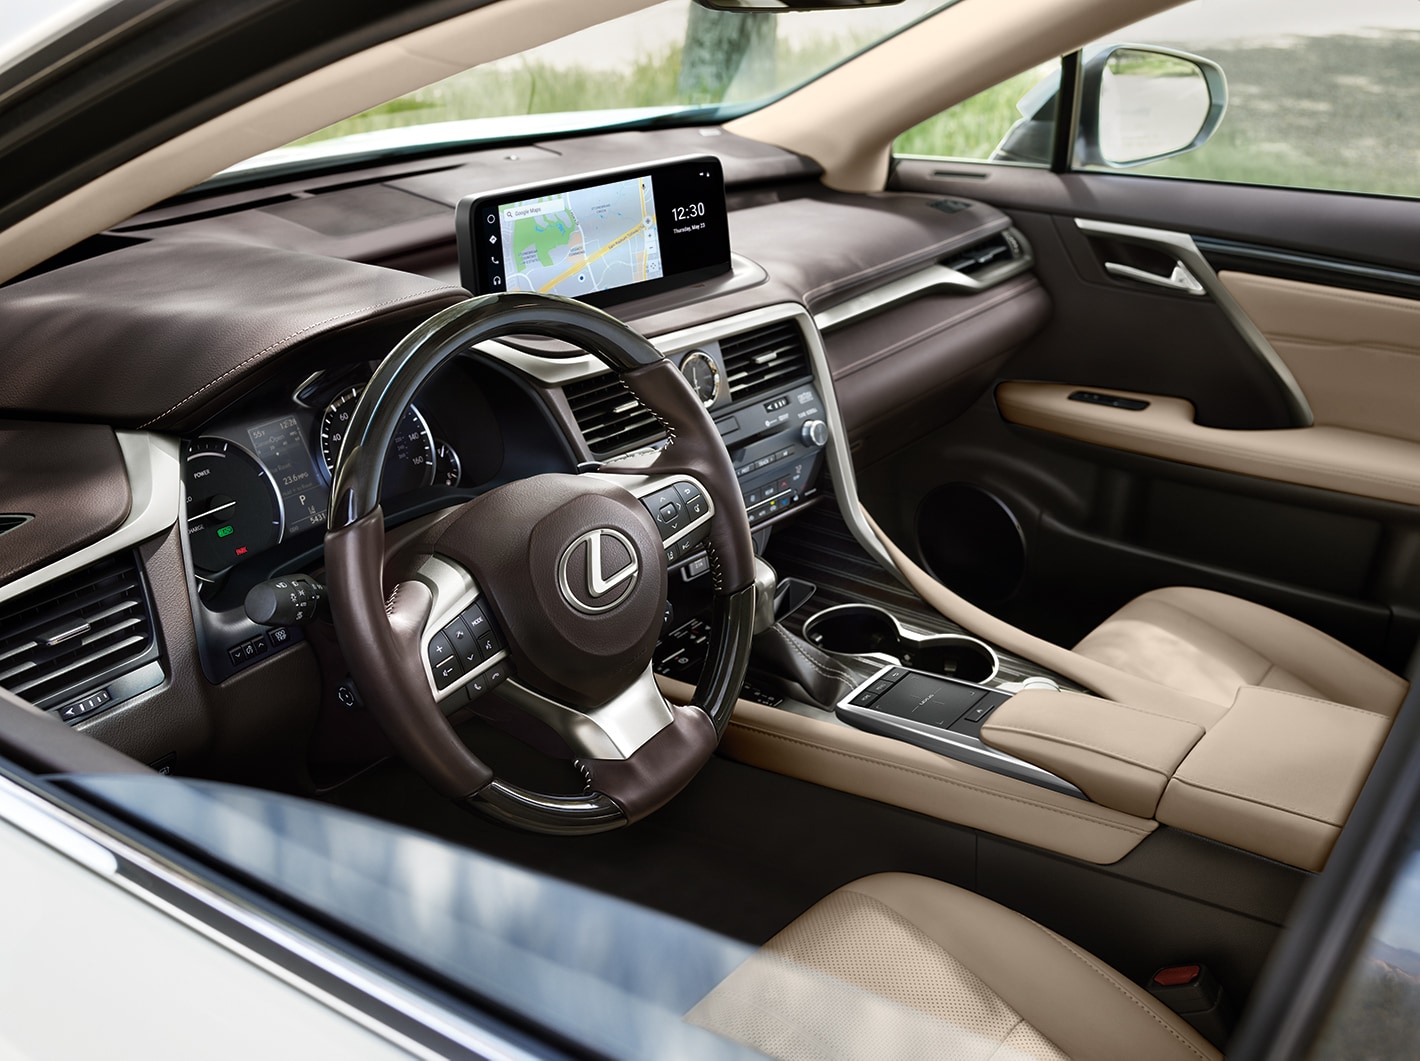 Style and Performance Features of the 2020 Lexus RX at Bobby Rahal Lexus of Lewistown of Lewistown | The interior of the 2020 Lexus RX